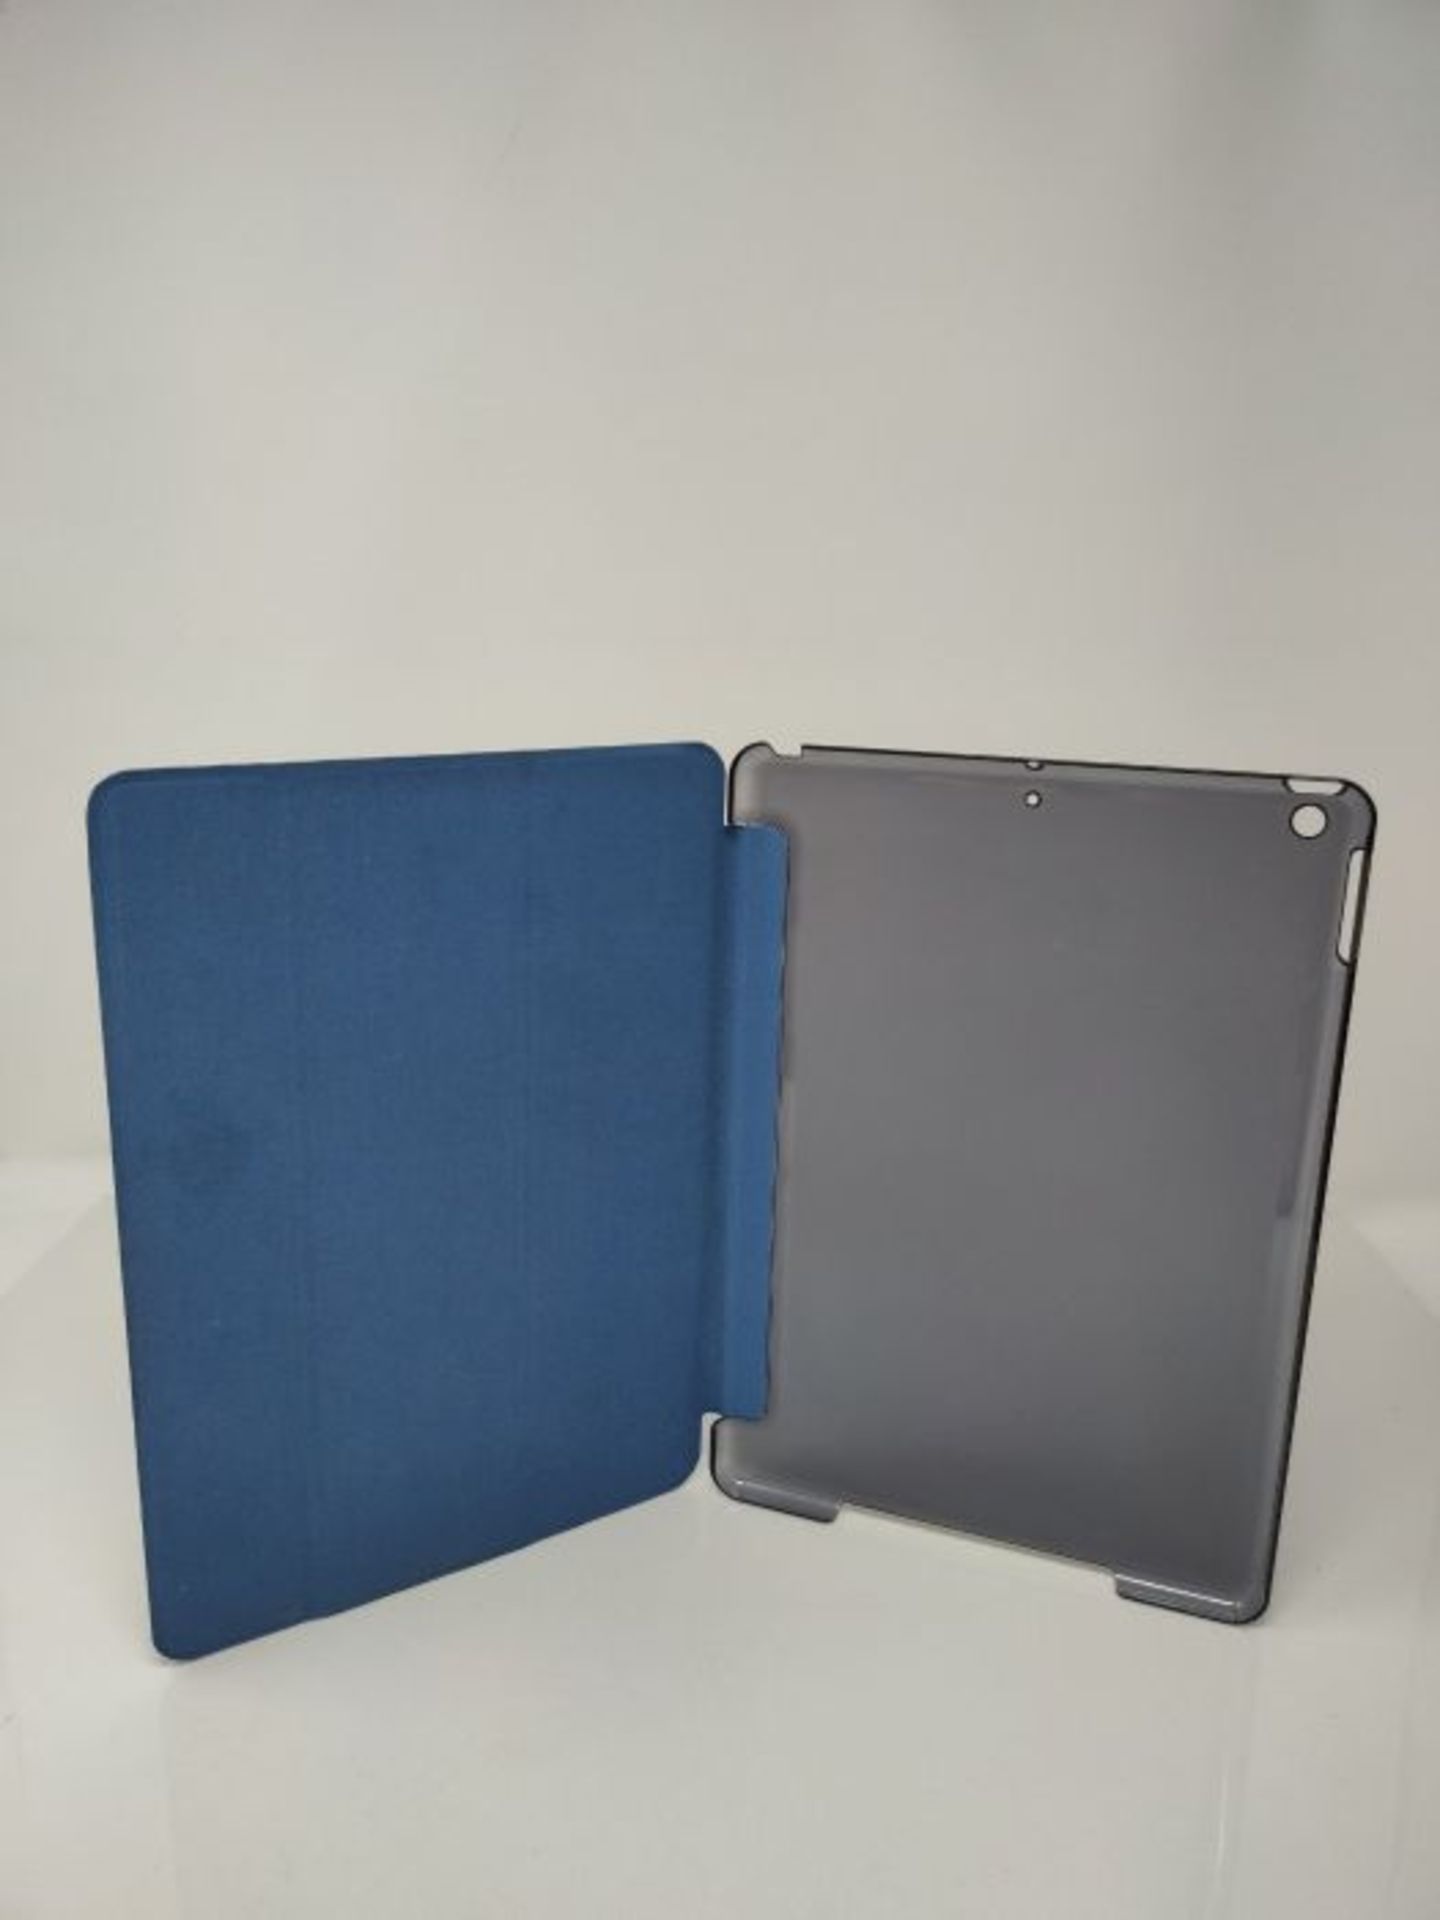 ProCase iPad 10.2 Inch 2021 2020 2019 Case with Screen Protector, Slim Protective Cove - Image 2 of 2